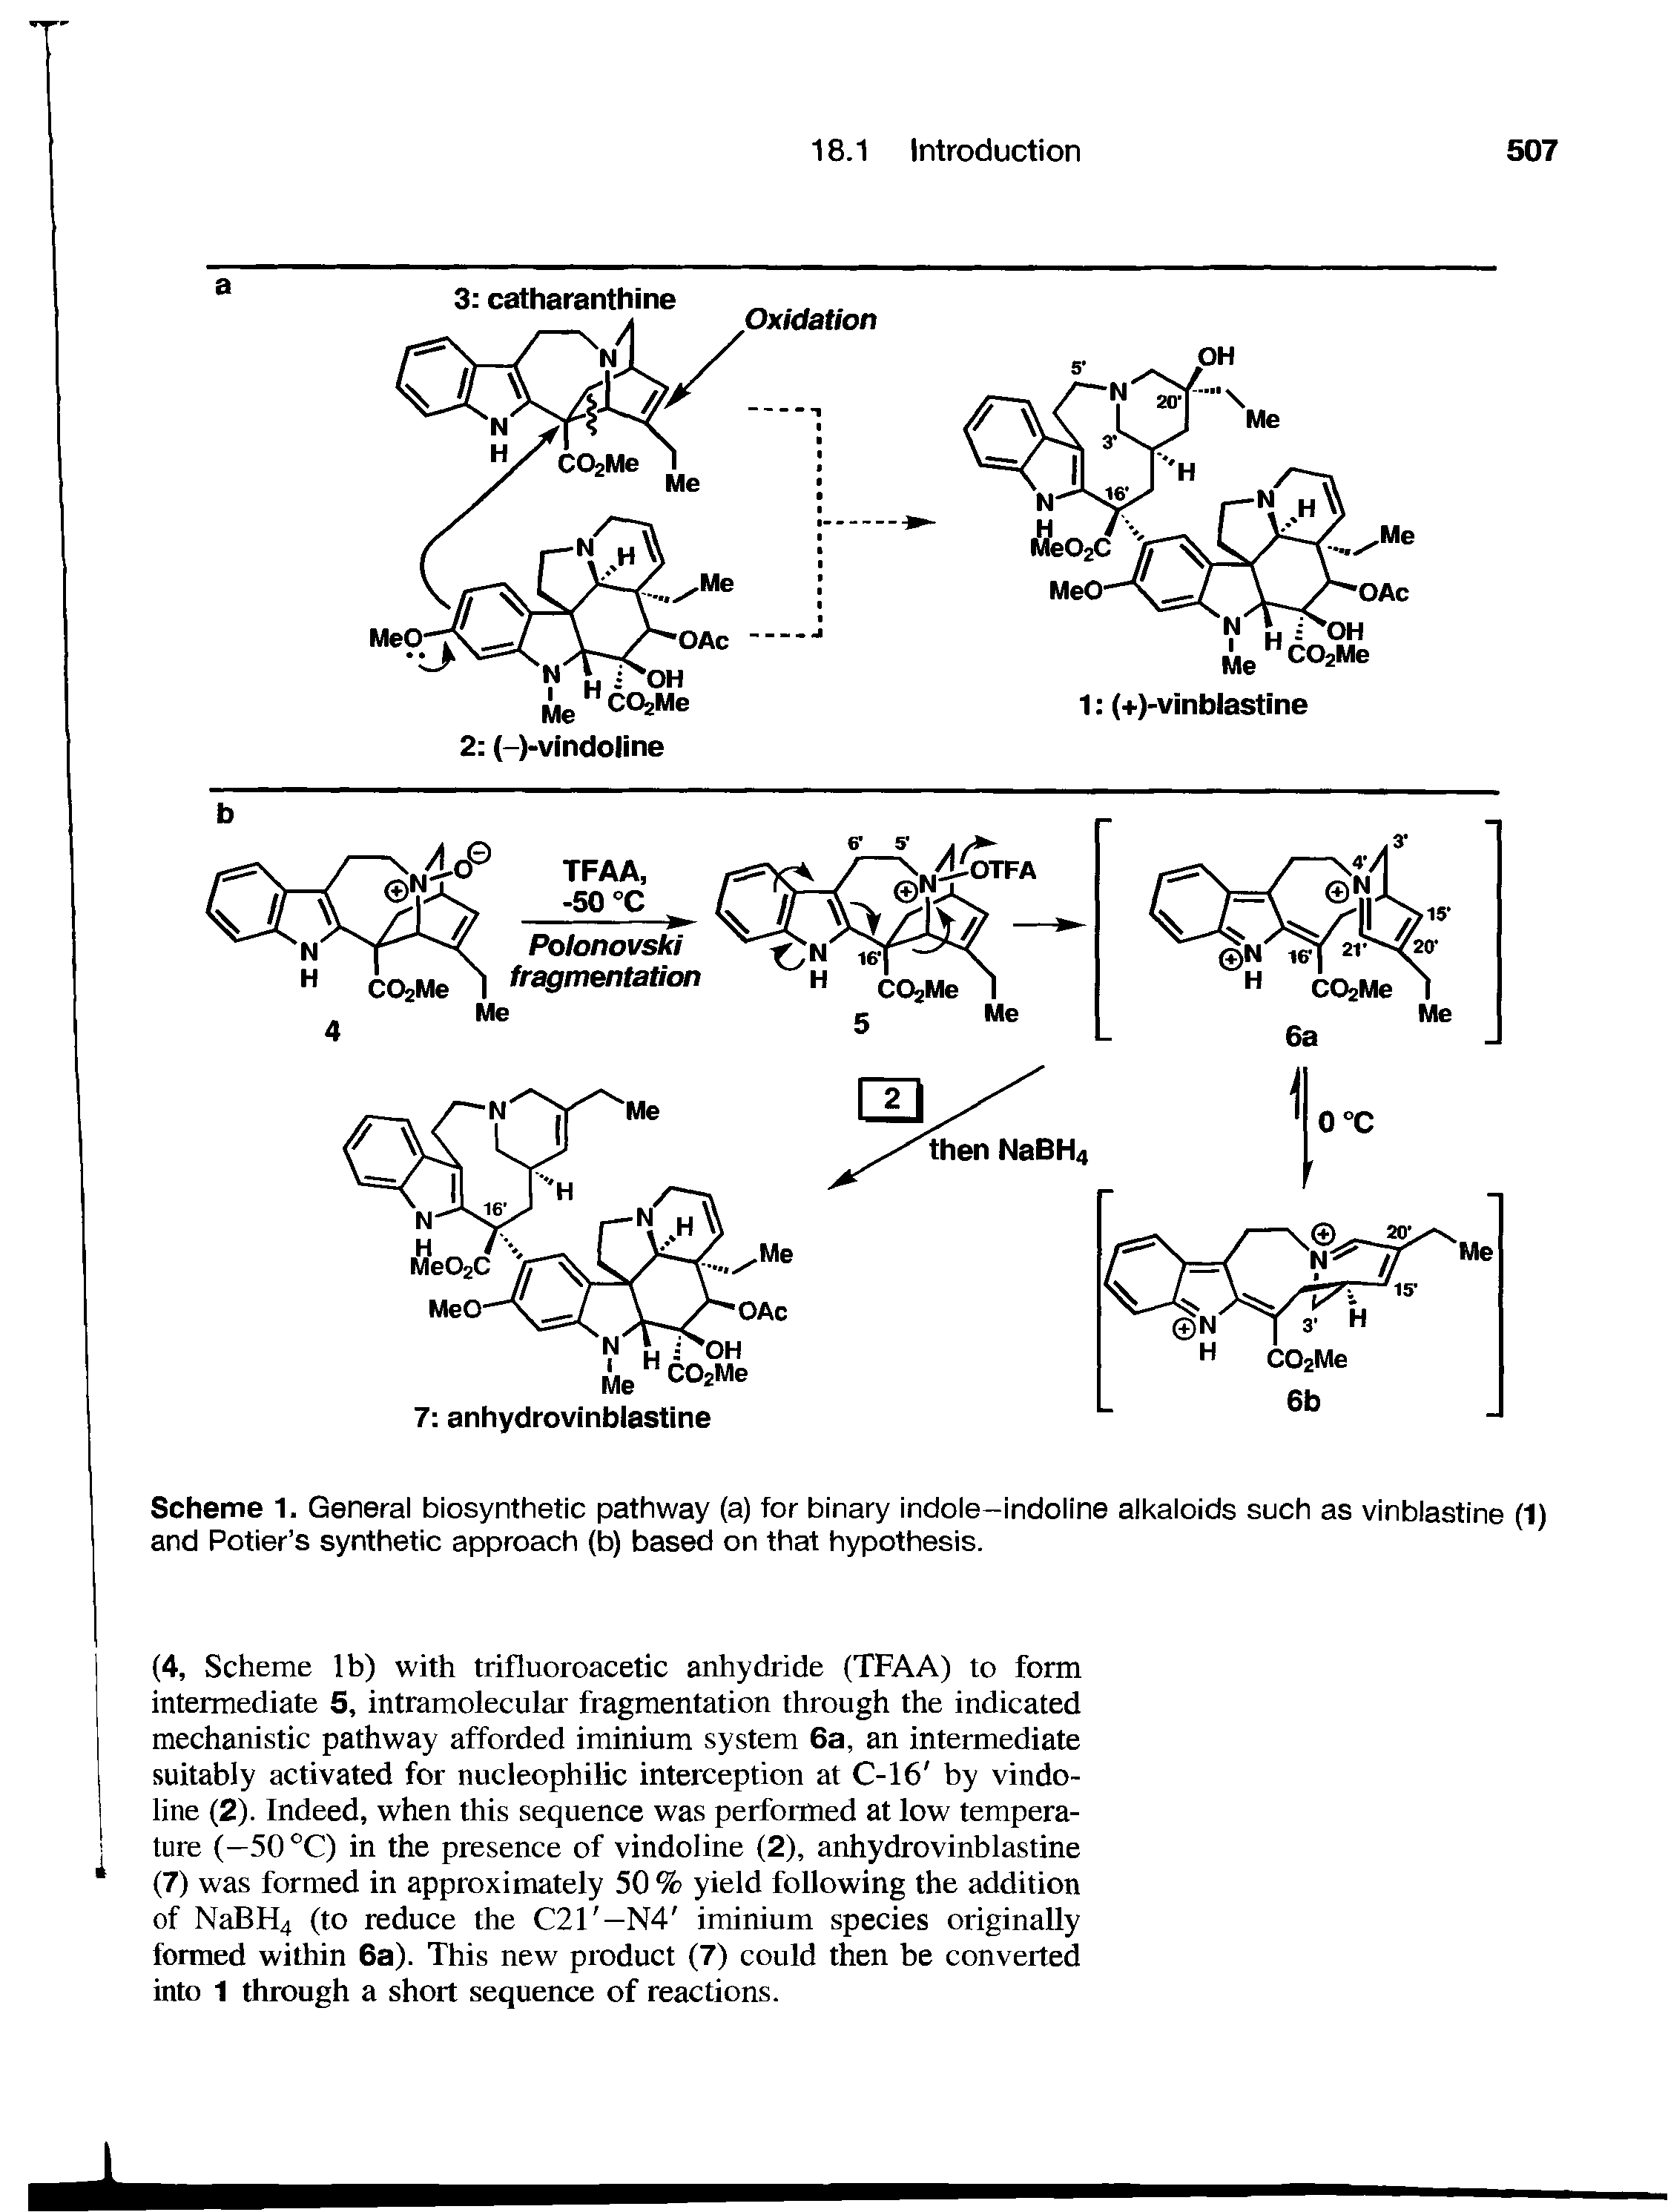 Scheme 1. General biosynthetic pathway (a) for binary indole-indoline alkaloids such as vinblastine (1) and Potier s synthetic approach (b) based on that hypothesis.